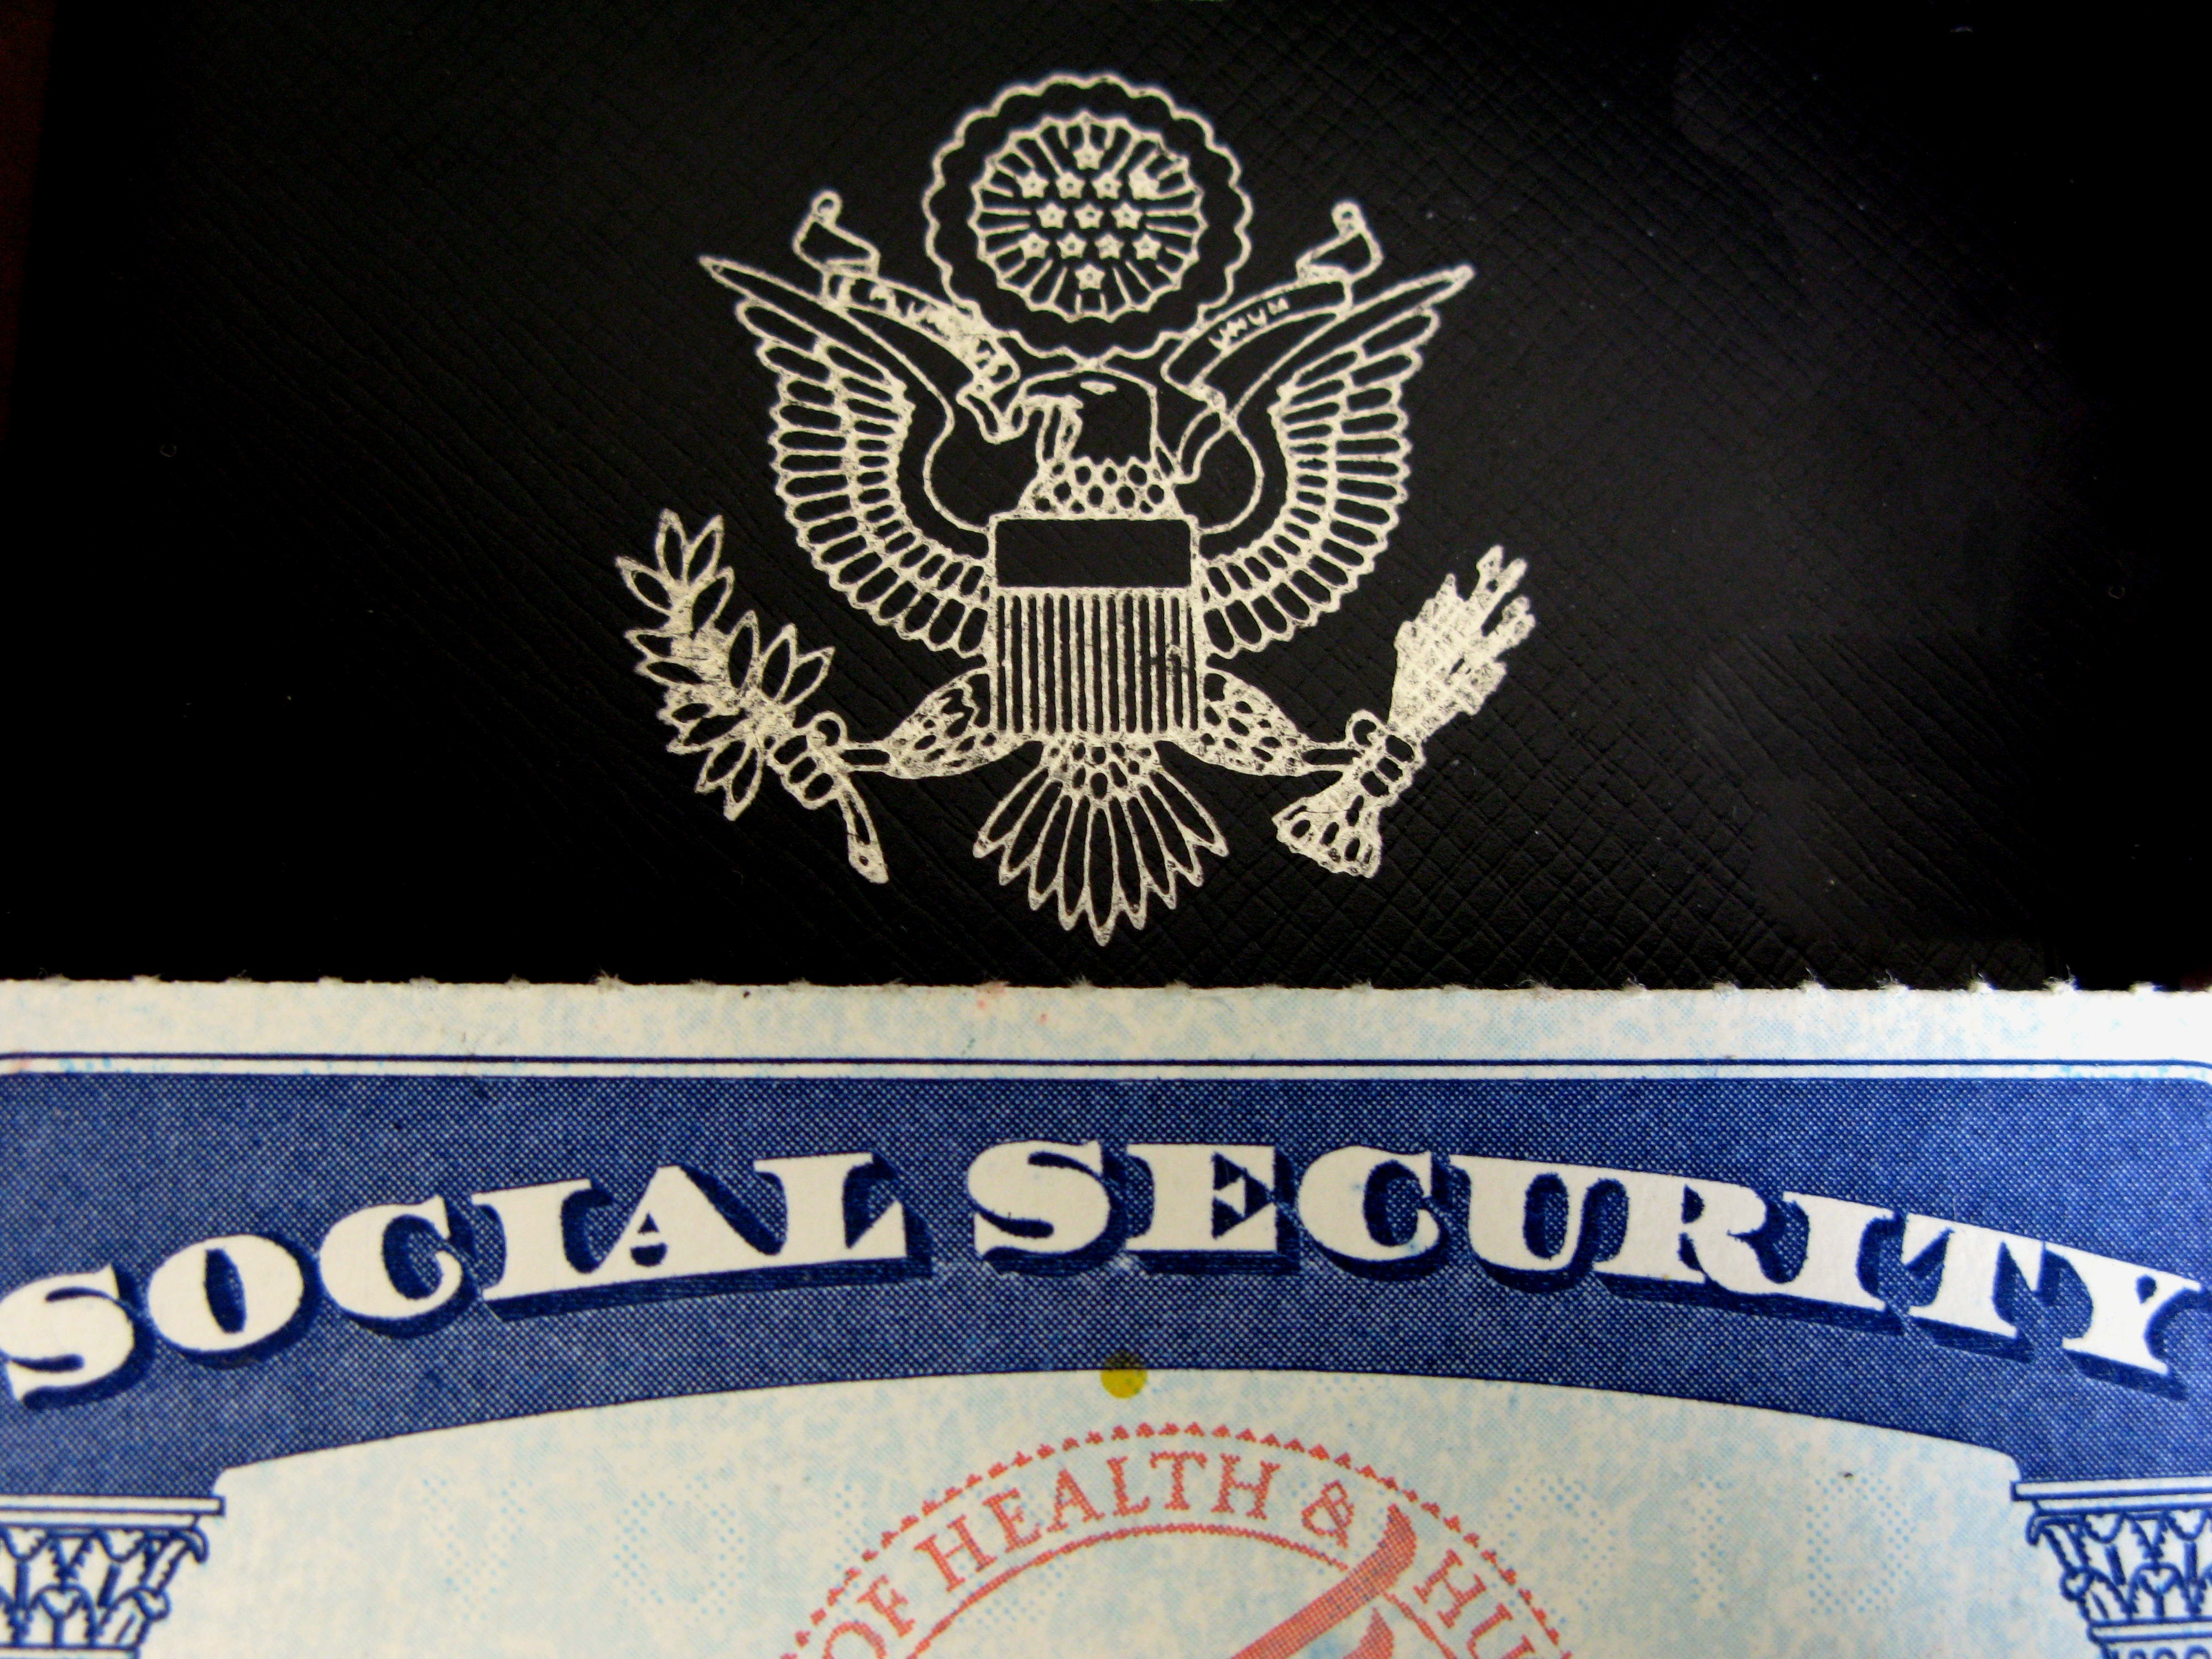 Social Security System